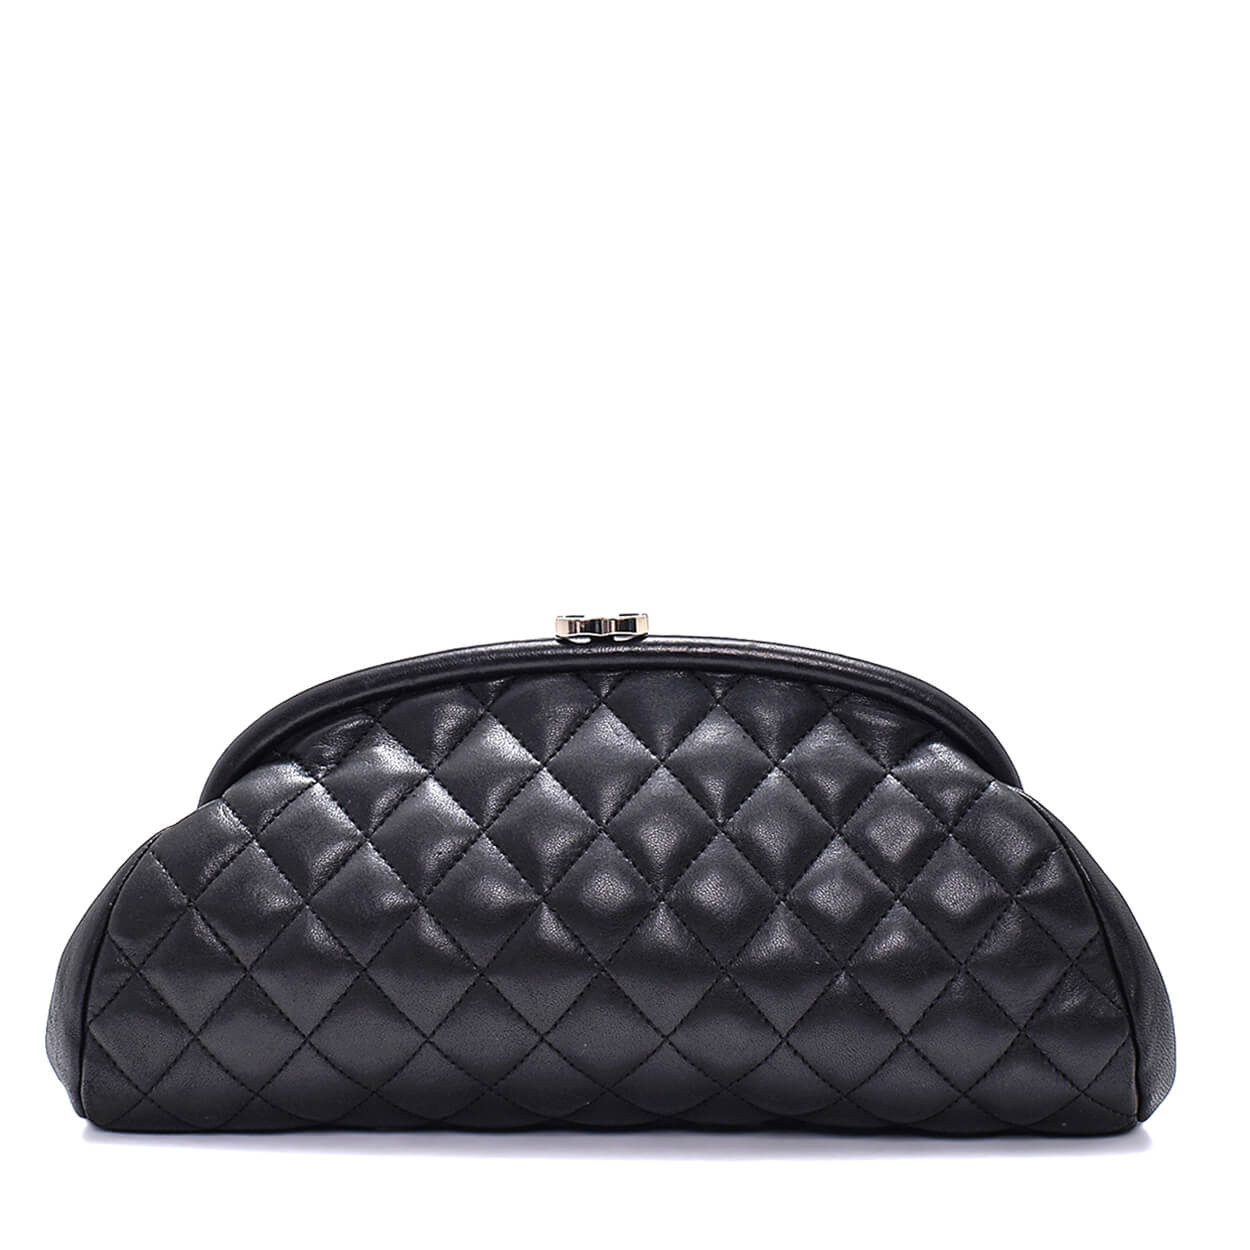 Chanel - Black Quilted Leather Timeless CC Clutch